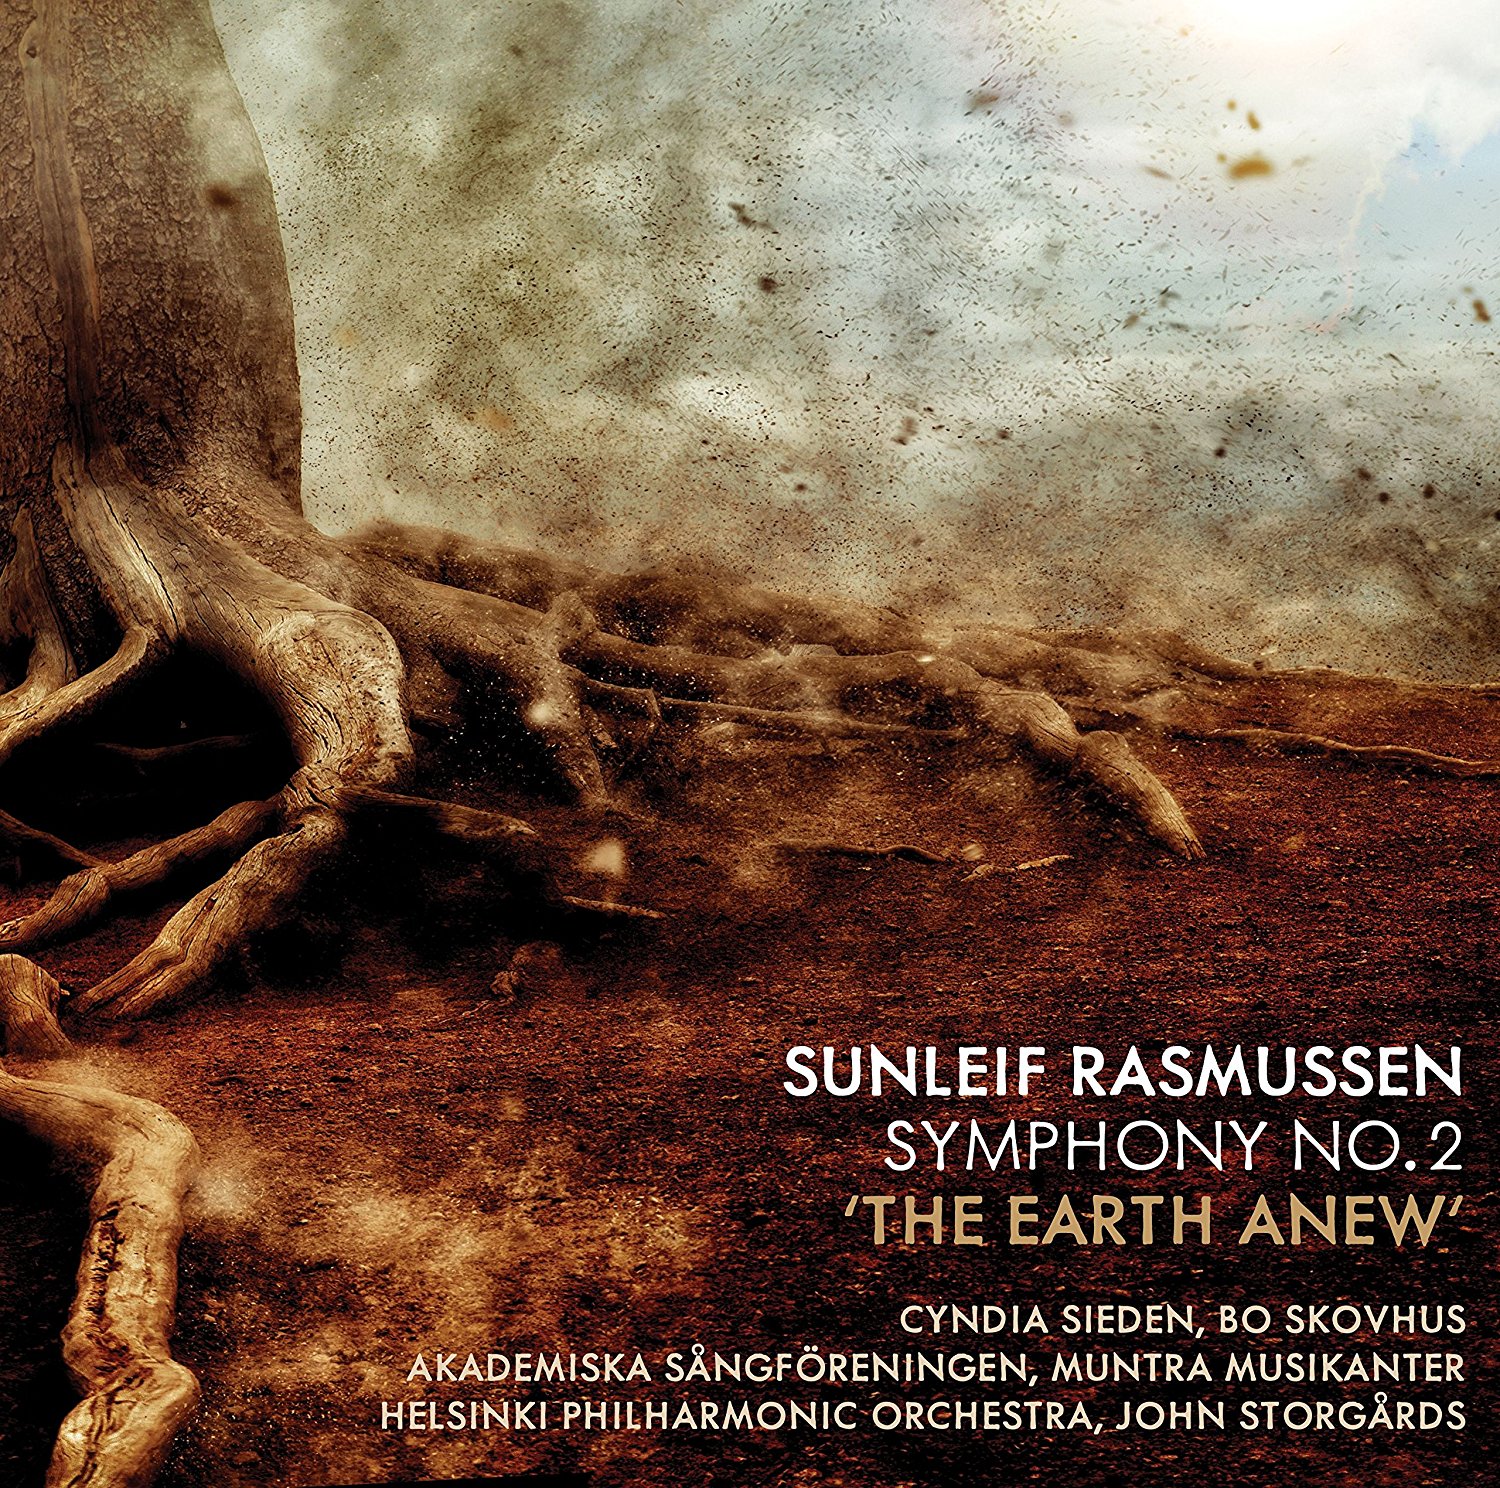 Sunleif Rasmussen: Symphony No. 2 "The Earth Anew"